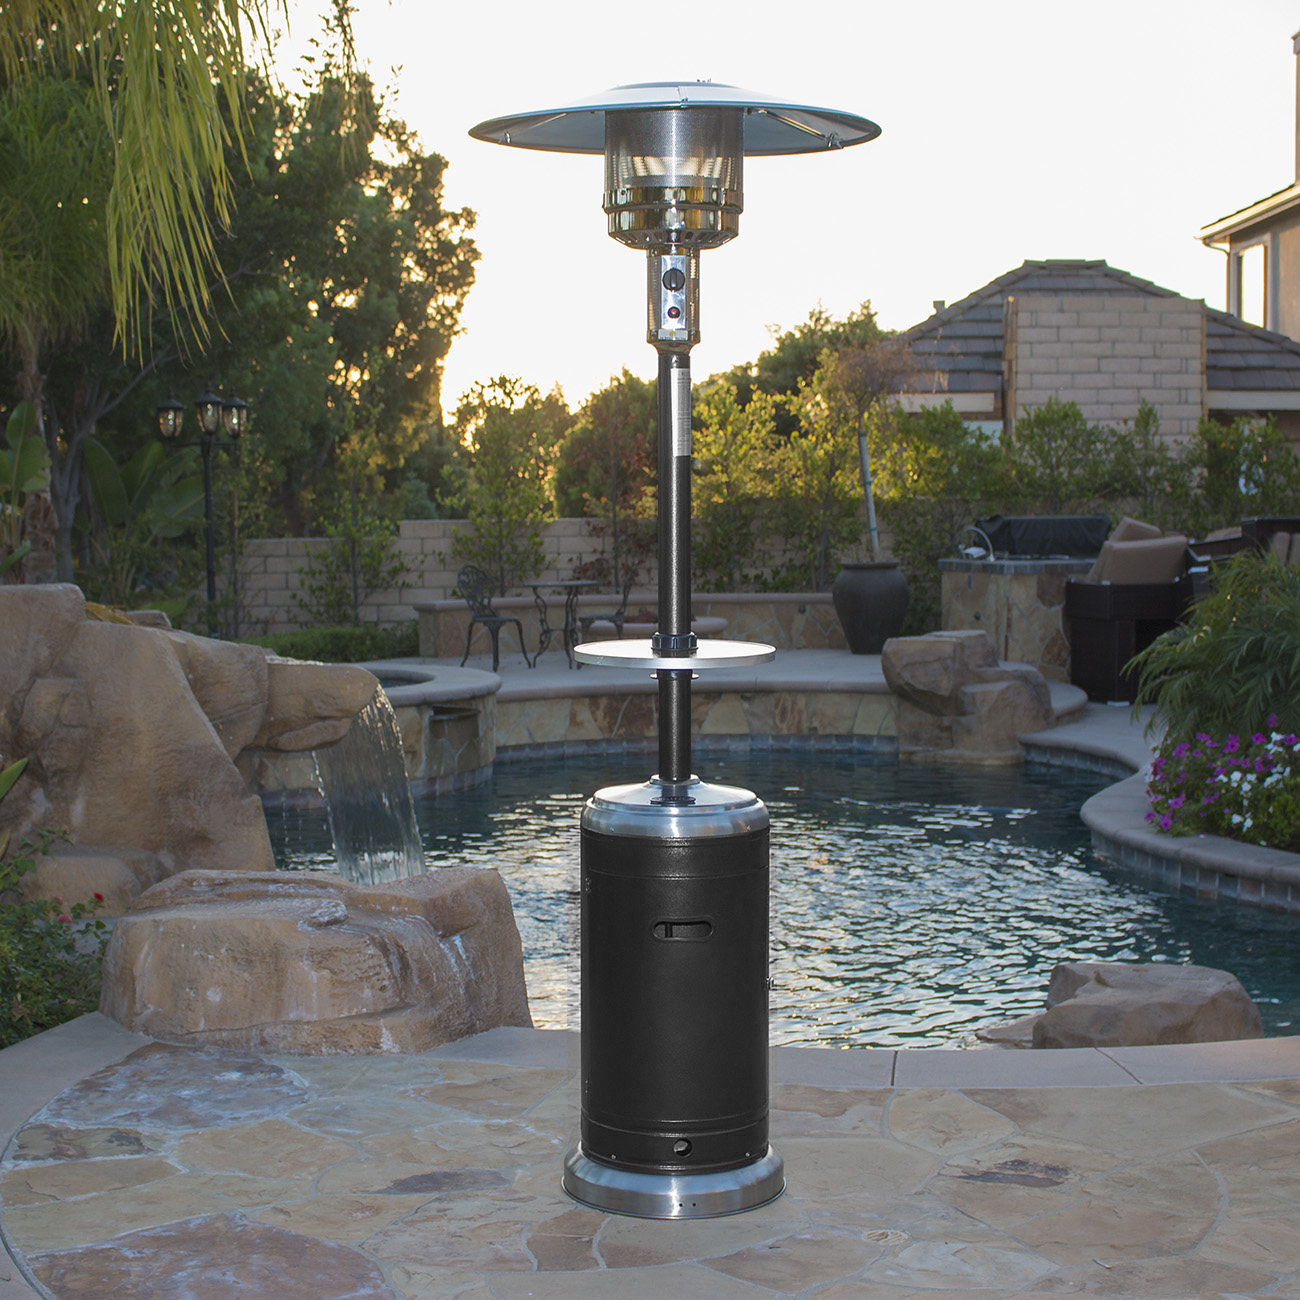 Details About 48000 Btu Black And Stainless Steel Full Size Propane Gas Patio Heater W Table intended for measurements 1300 X 1300